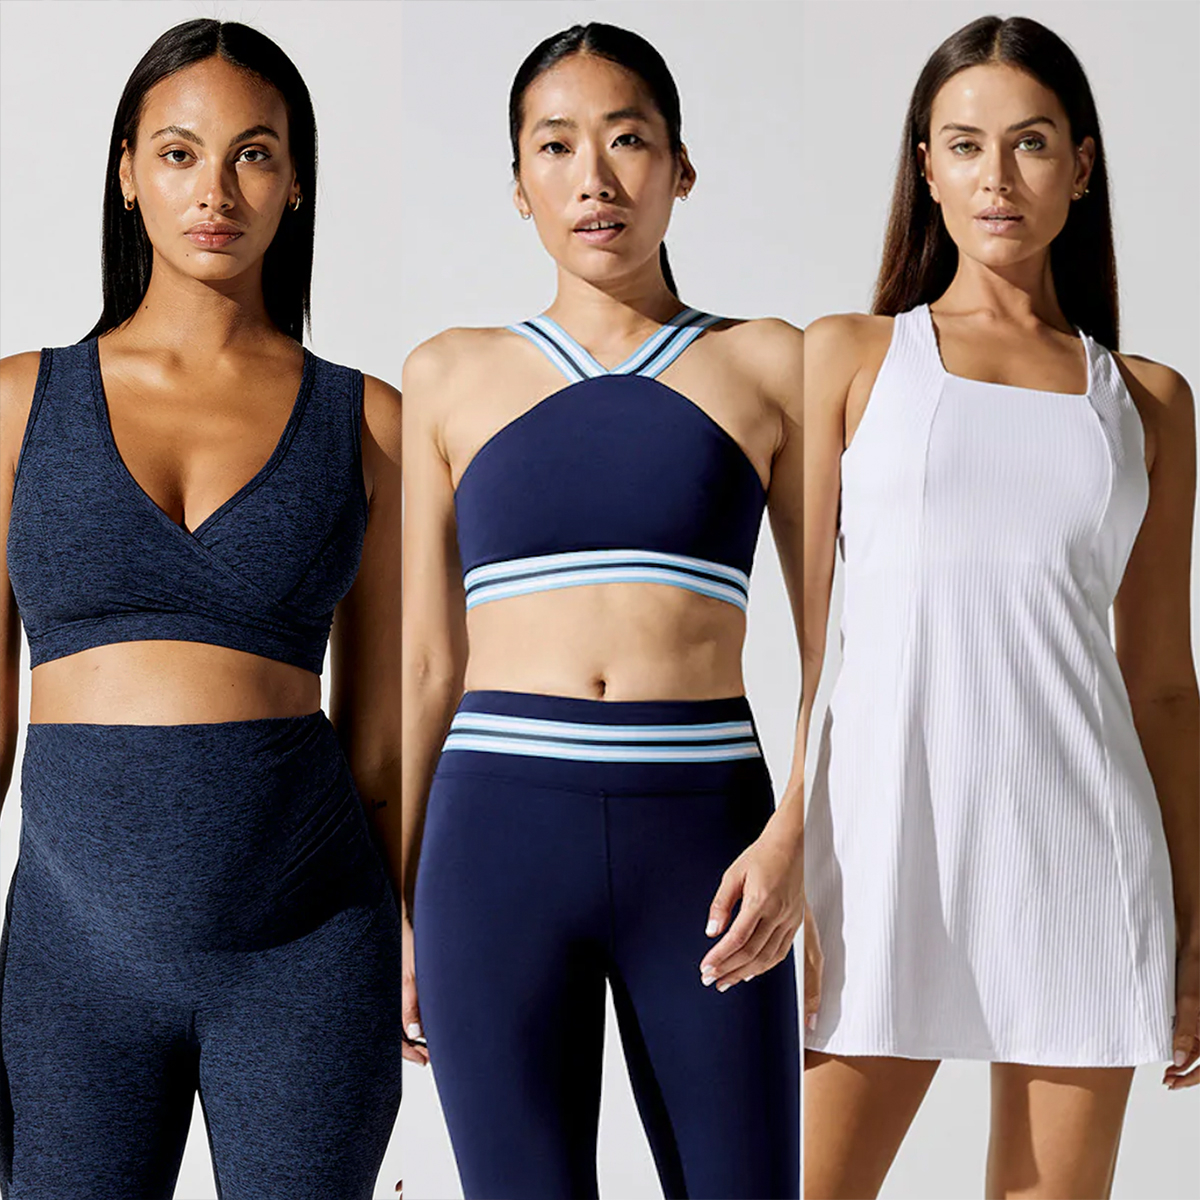 Activewear sale, best deals and discounts list: Save up to 70% on  activewear in midseason sale including cheap bike shorts, leggings and more  